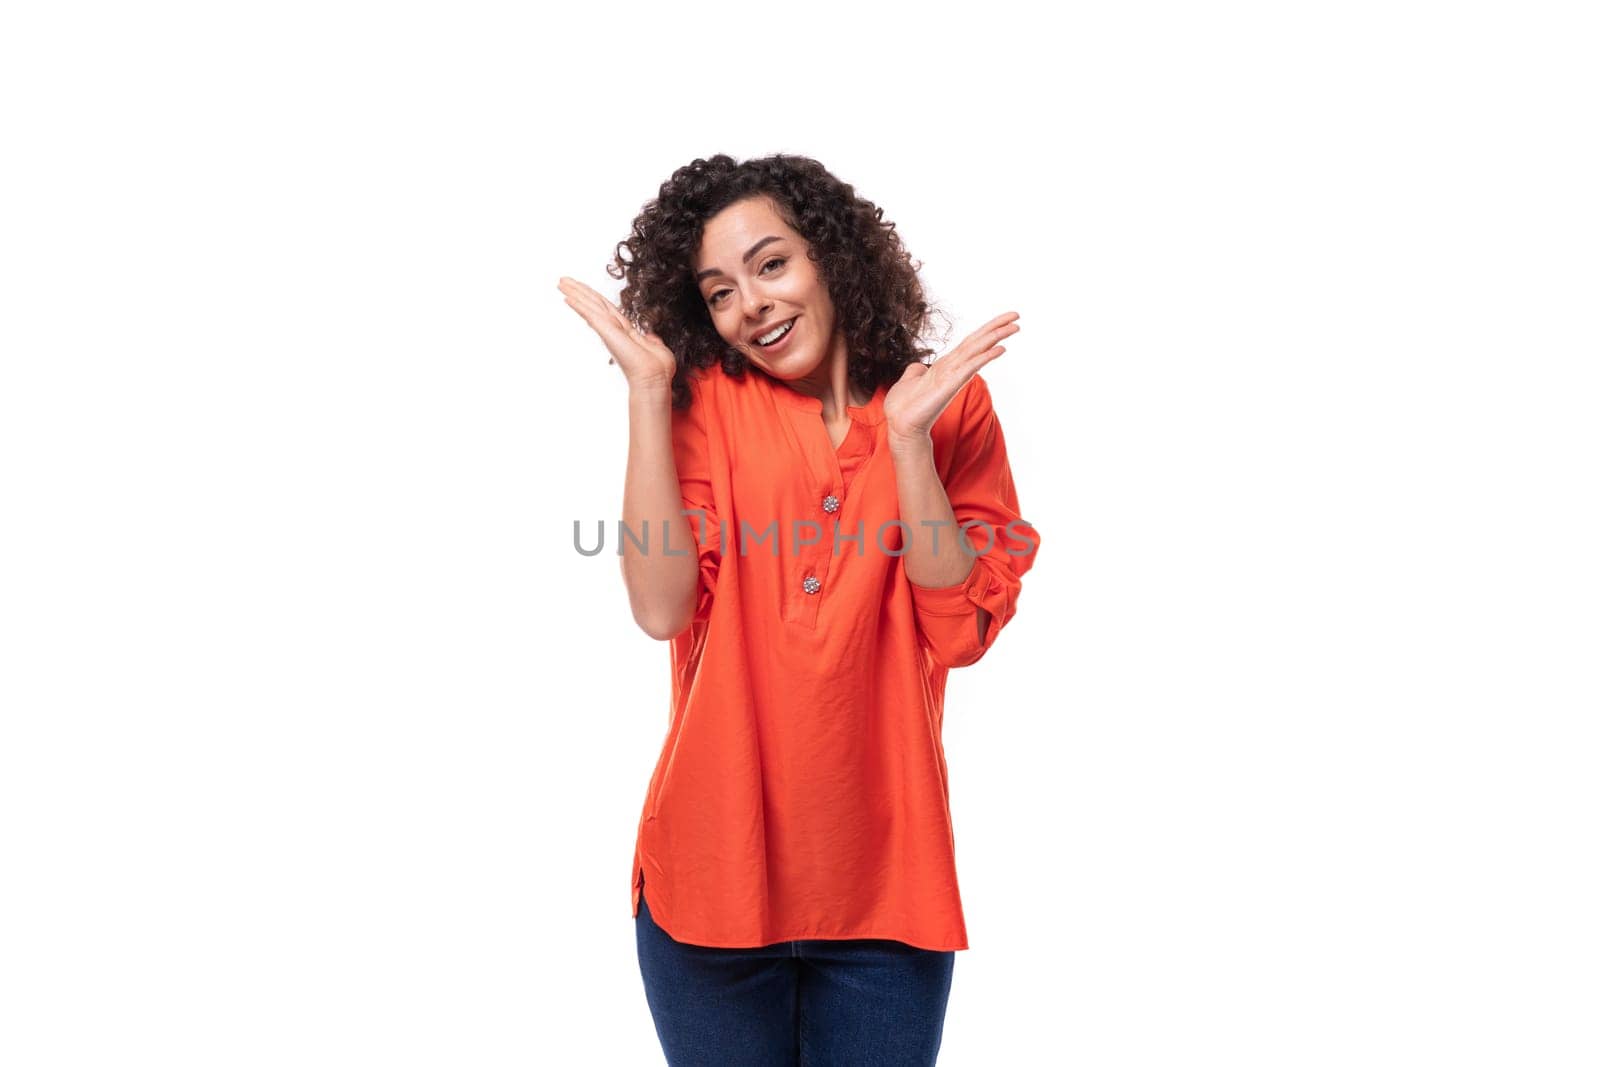 young dreamy caucasian business woman with wavy hair dressed in an orange blouse on a white background by TRMK